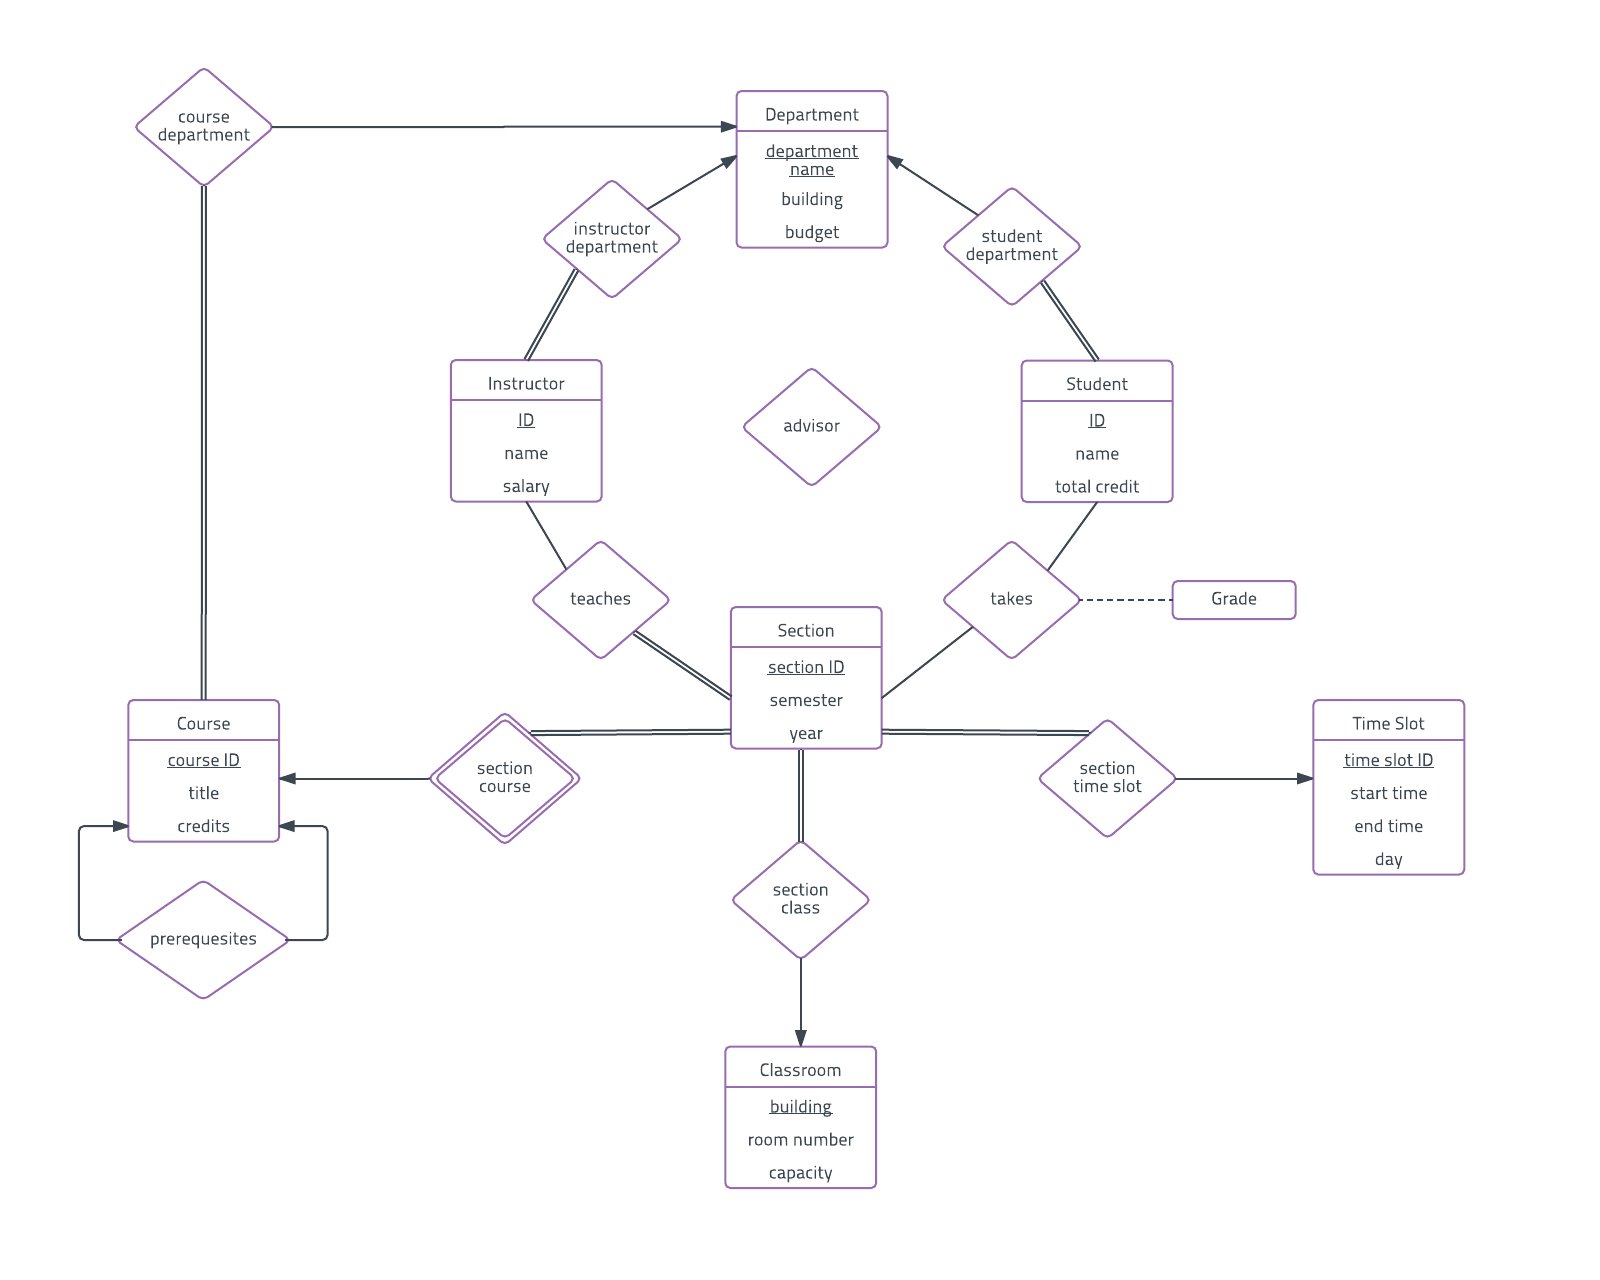 Er Diagram Examples And Templates | Lucidchart pertaining to Er Model Examples In Dbms